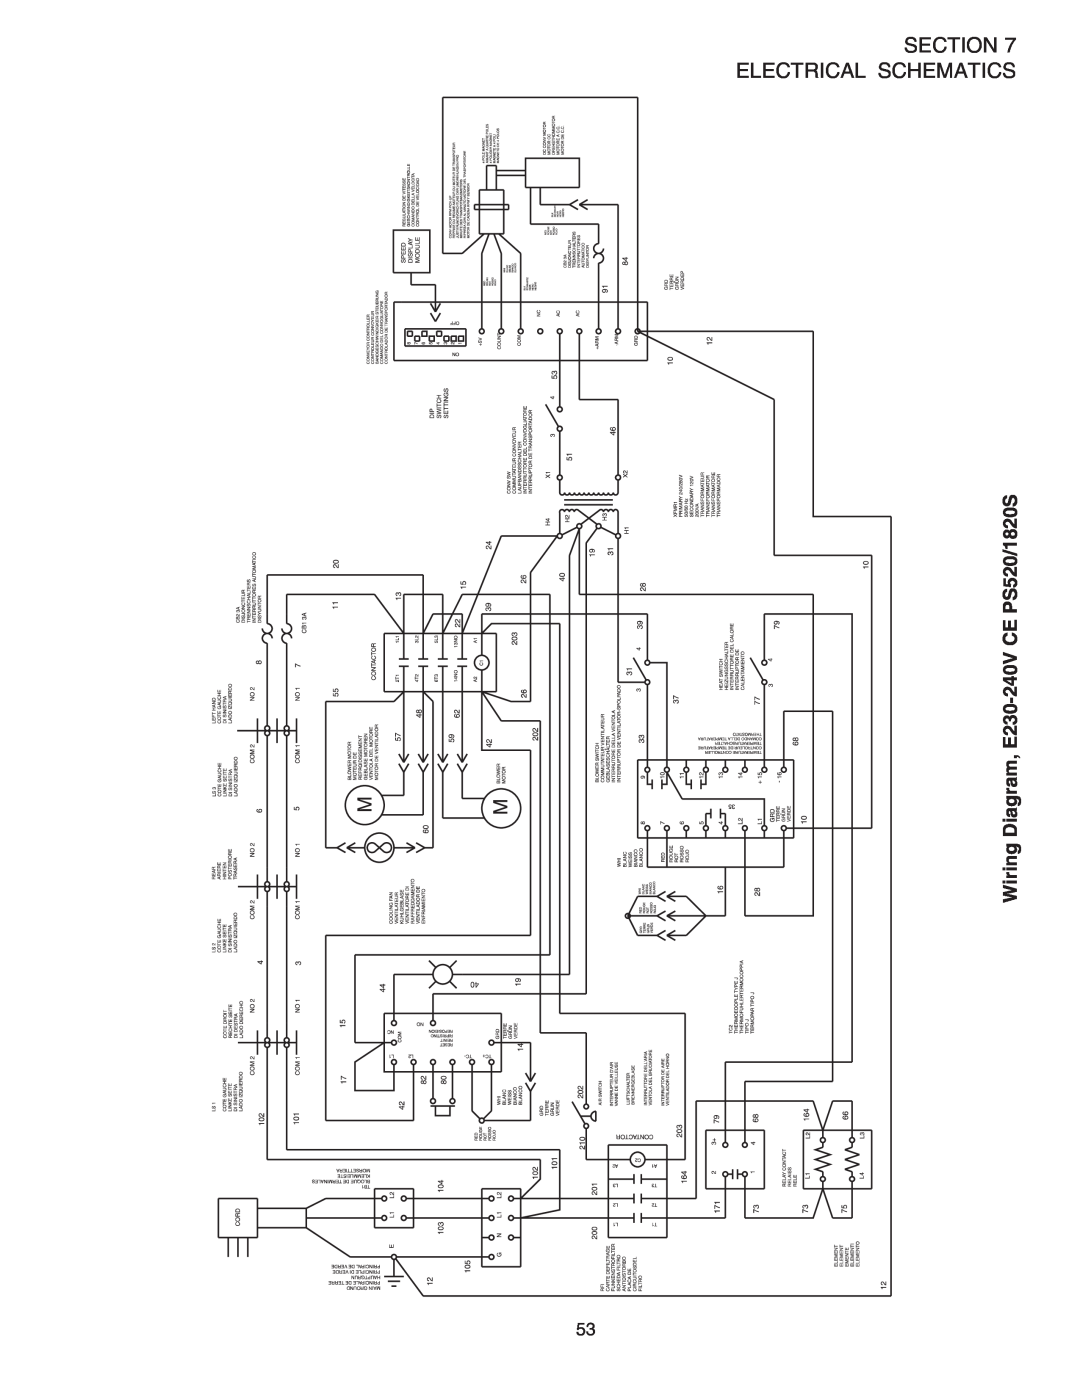 Middleby Marshall installation manual Section Electrical Schematics, Wiring Diagram, E230-240VCE PS520/1820S 